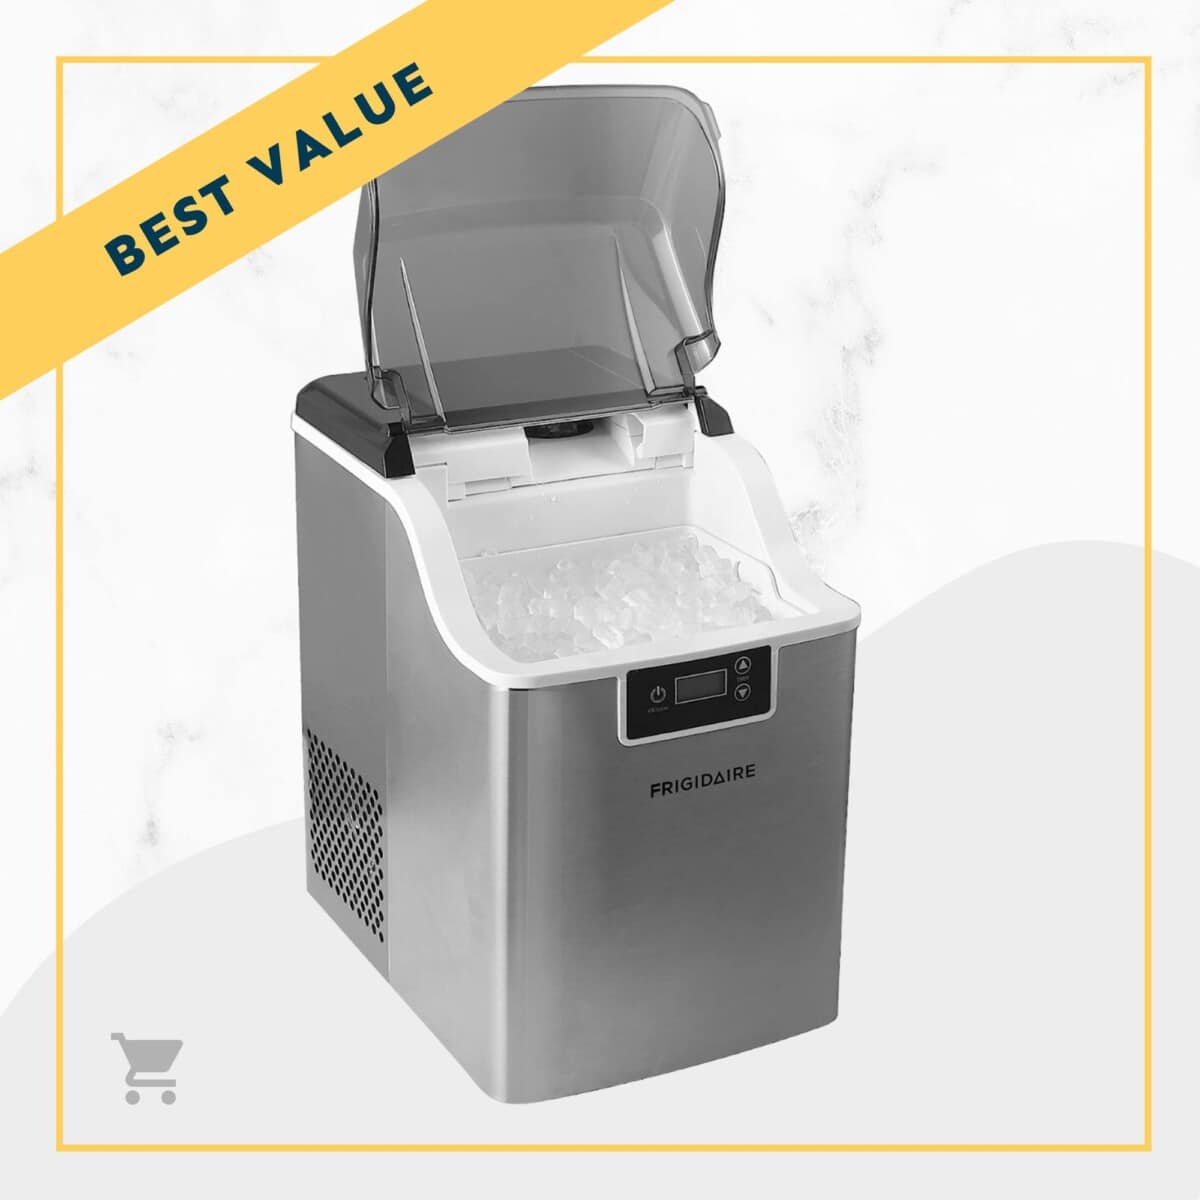 The best ice maker on the market.